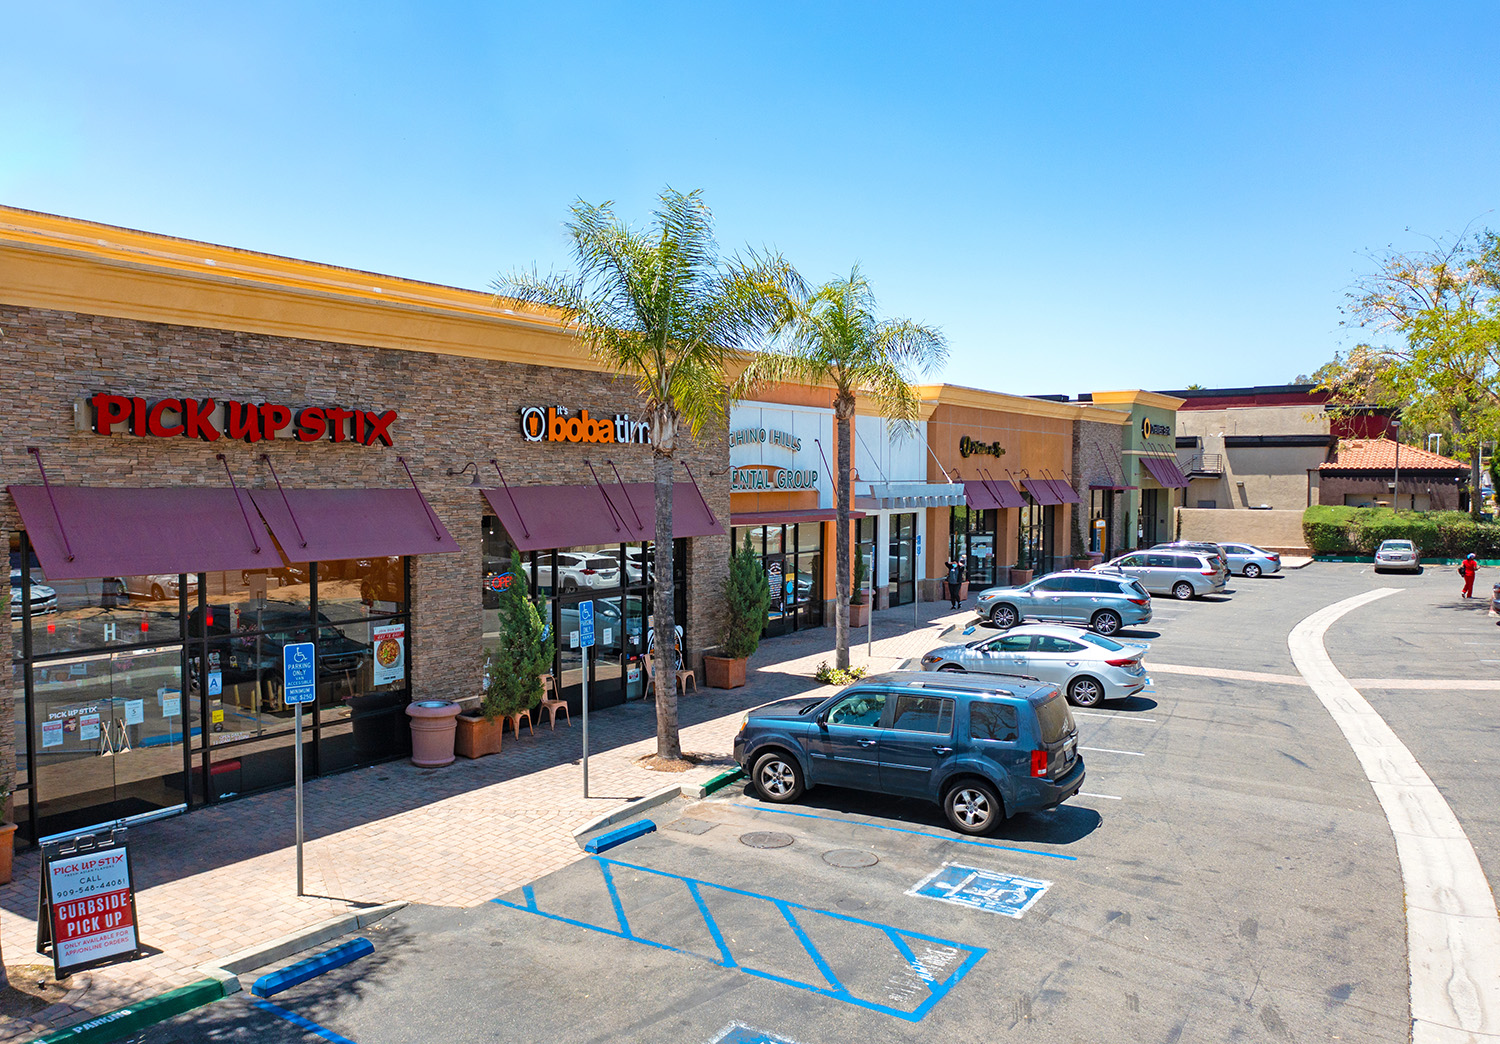 Hanley Investment Group Arranges Sales of Two Multi-Tenant Retail Properties in Chino Hills, Calif. for $19 Million